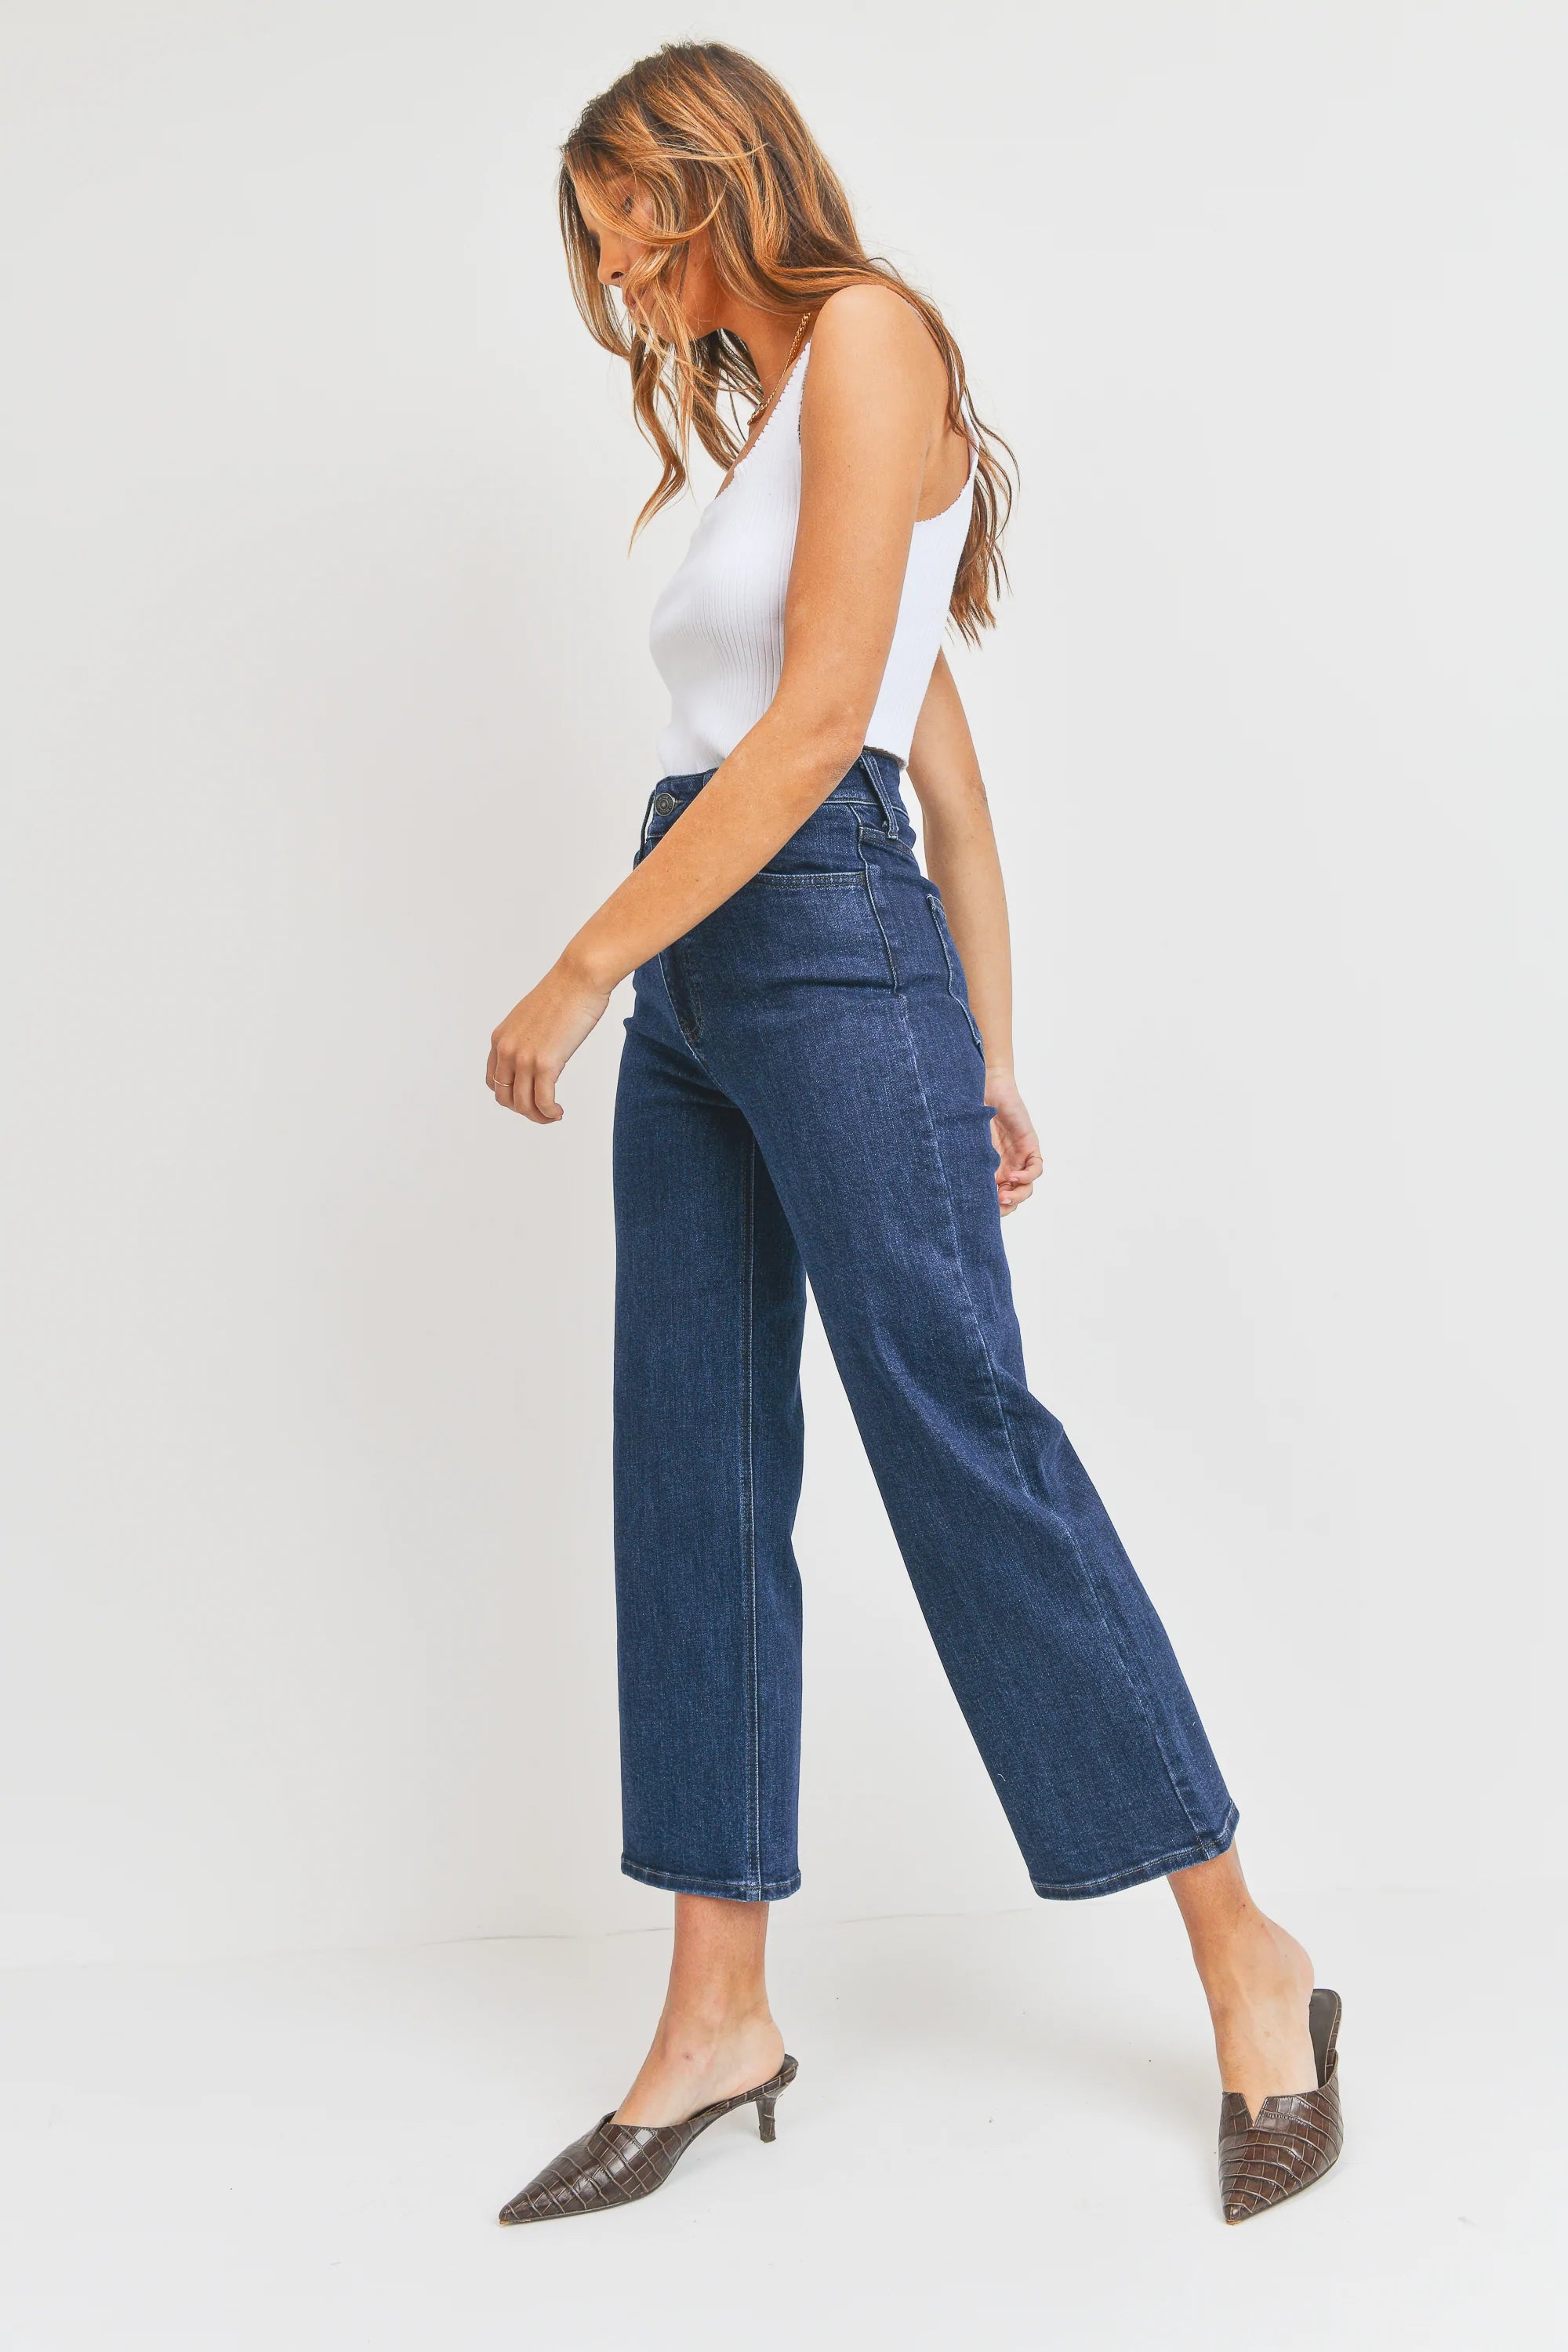 The Jemma Contemporary Wide Leg Jeans by Just Black Denim